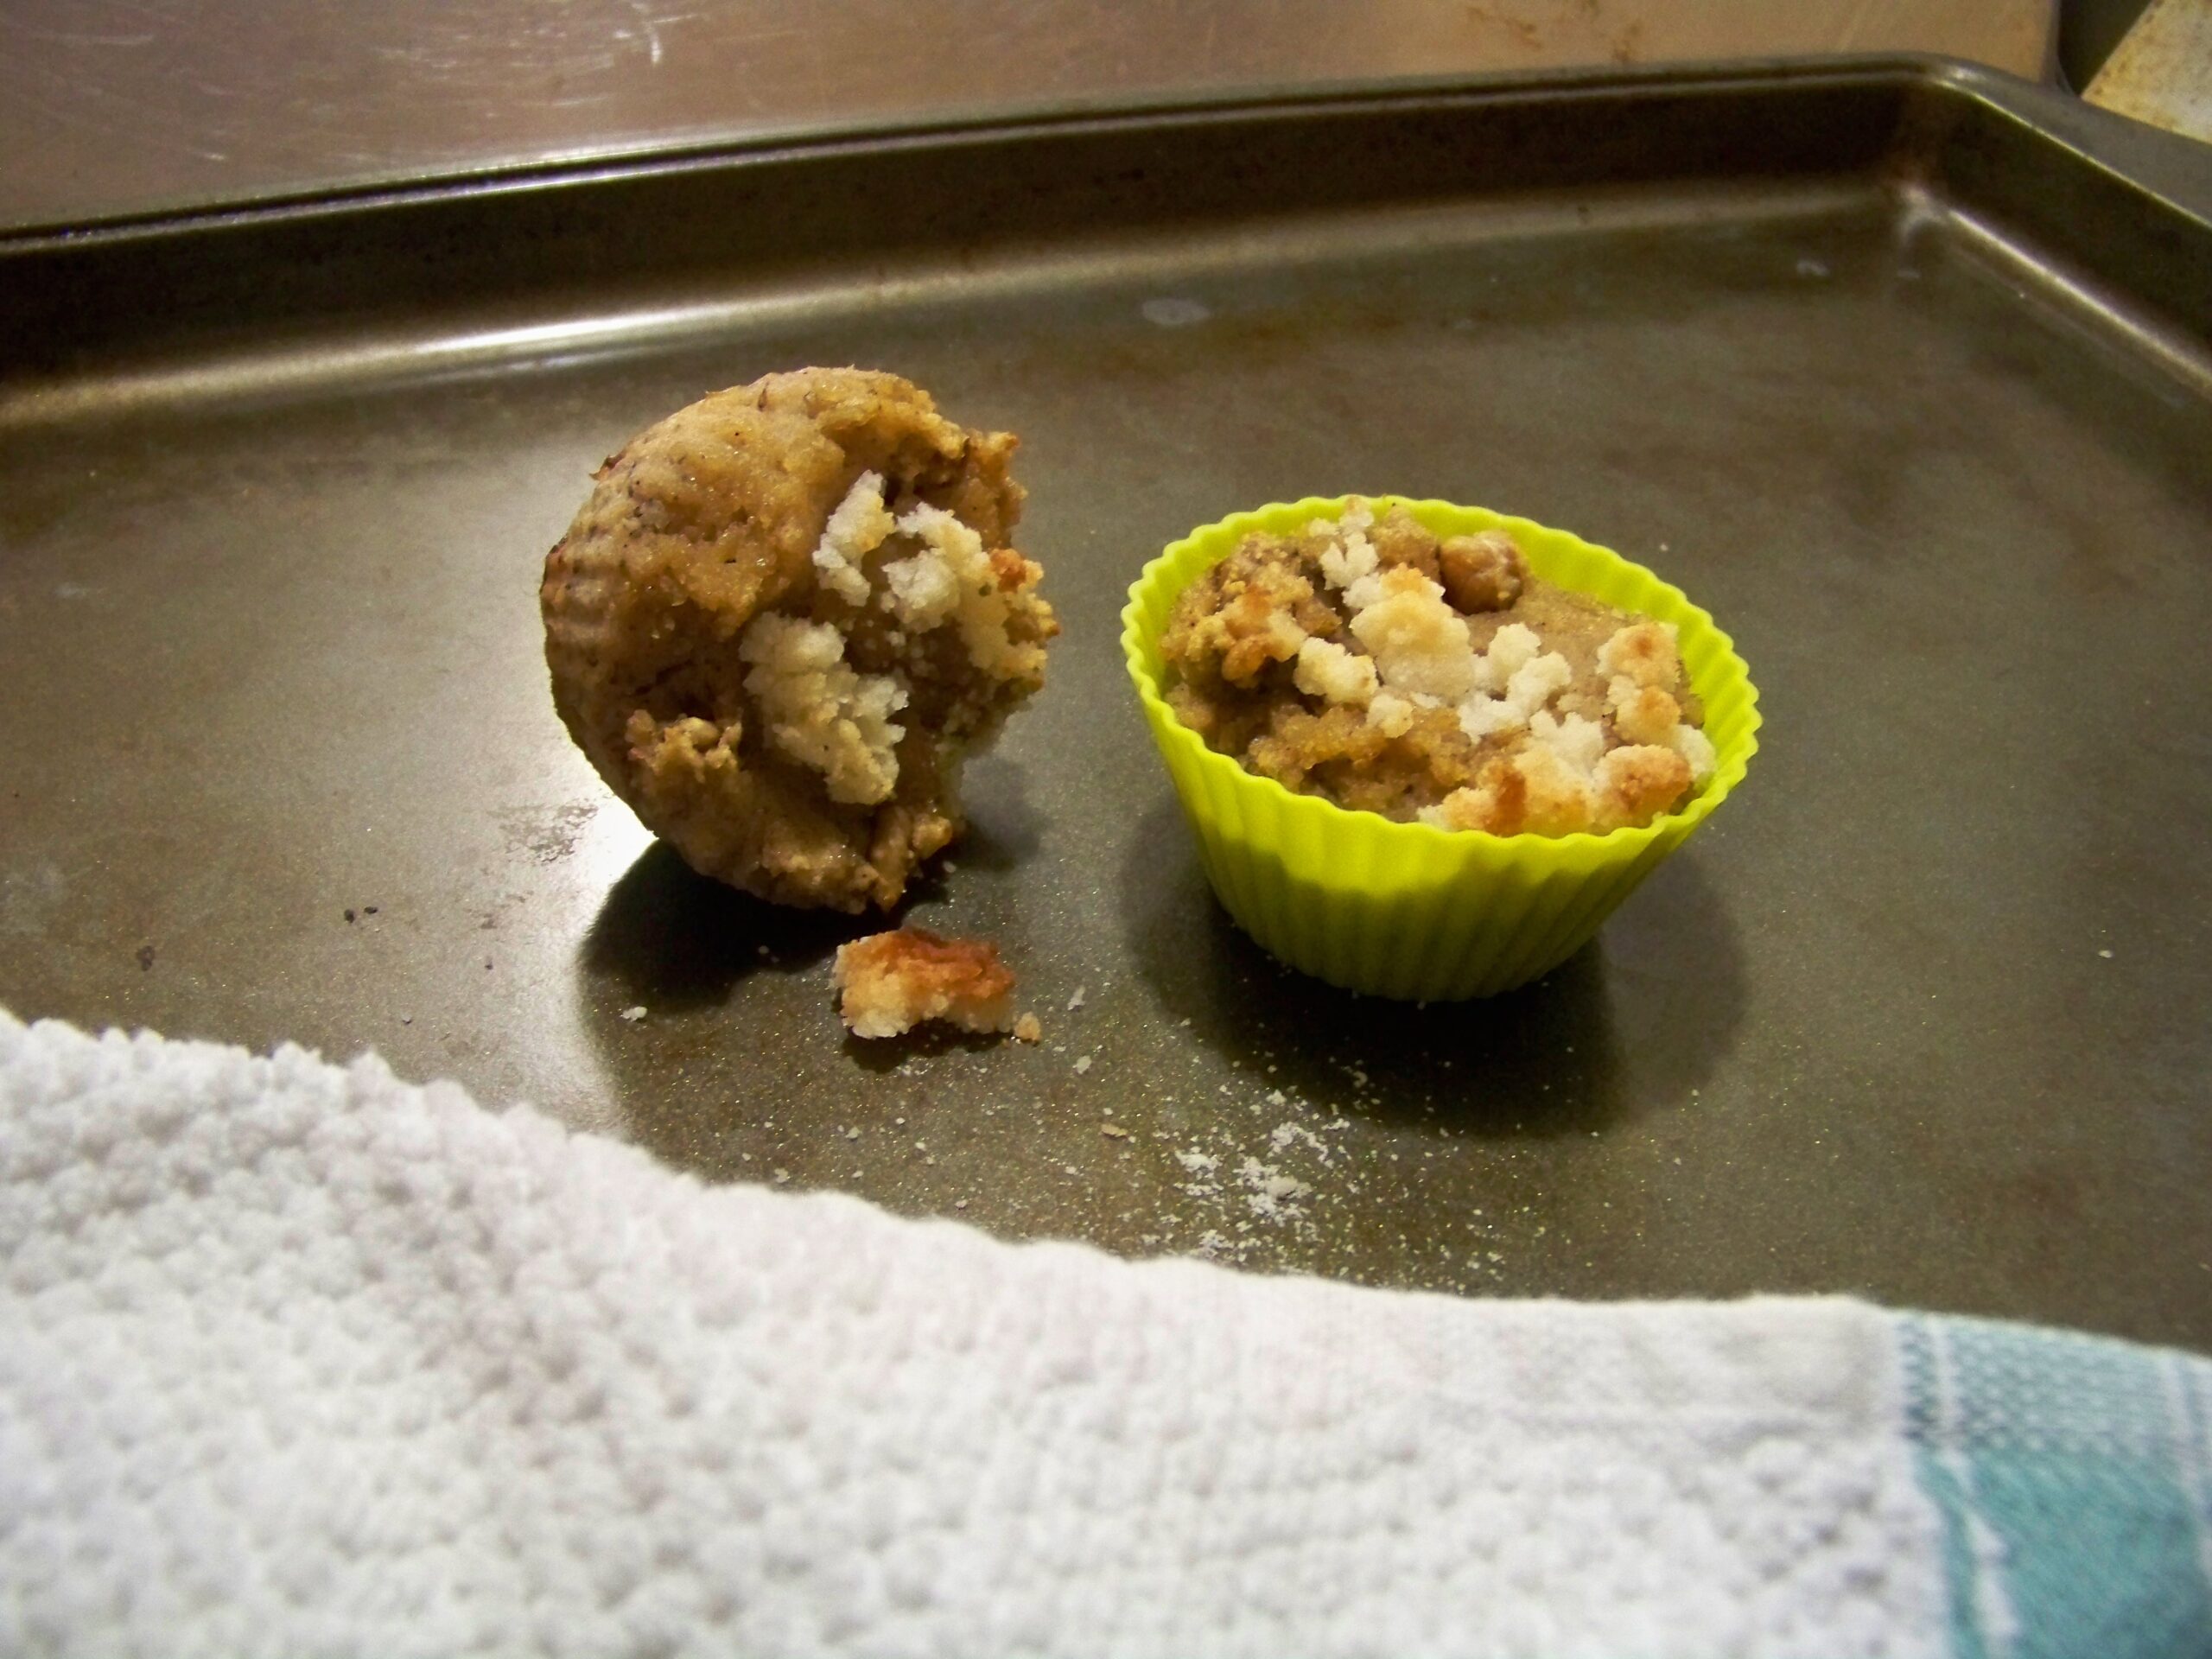 Two banana nut muffins, one in a yellow silicone liner and the other without a liner on a cookie sheet with a white cloth with a blue stripe in the forefront of the photo